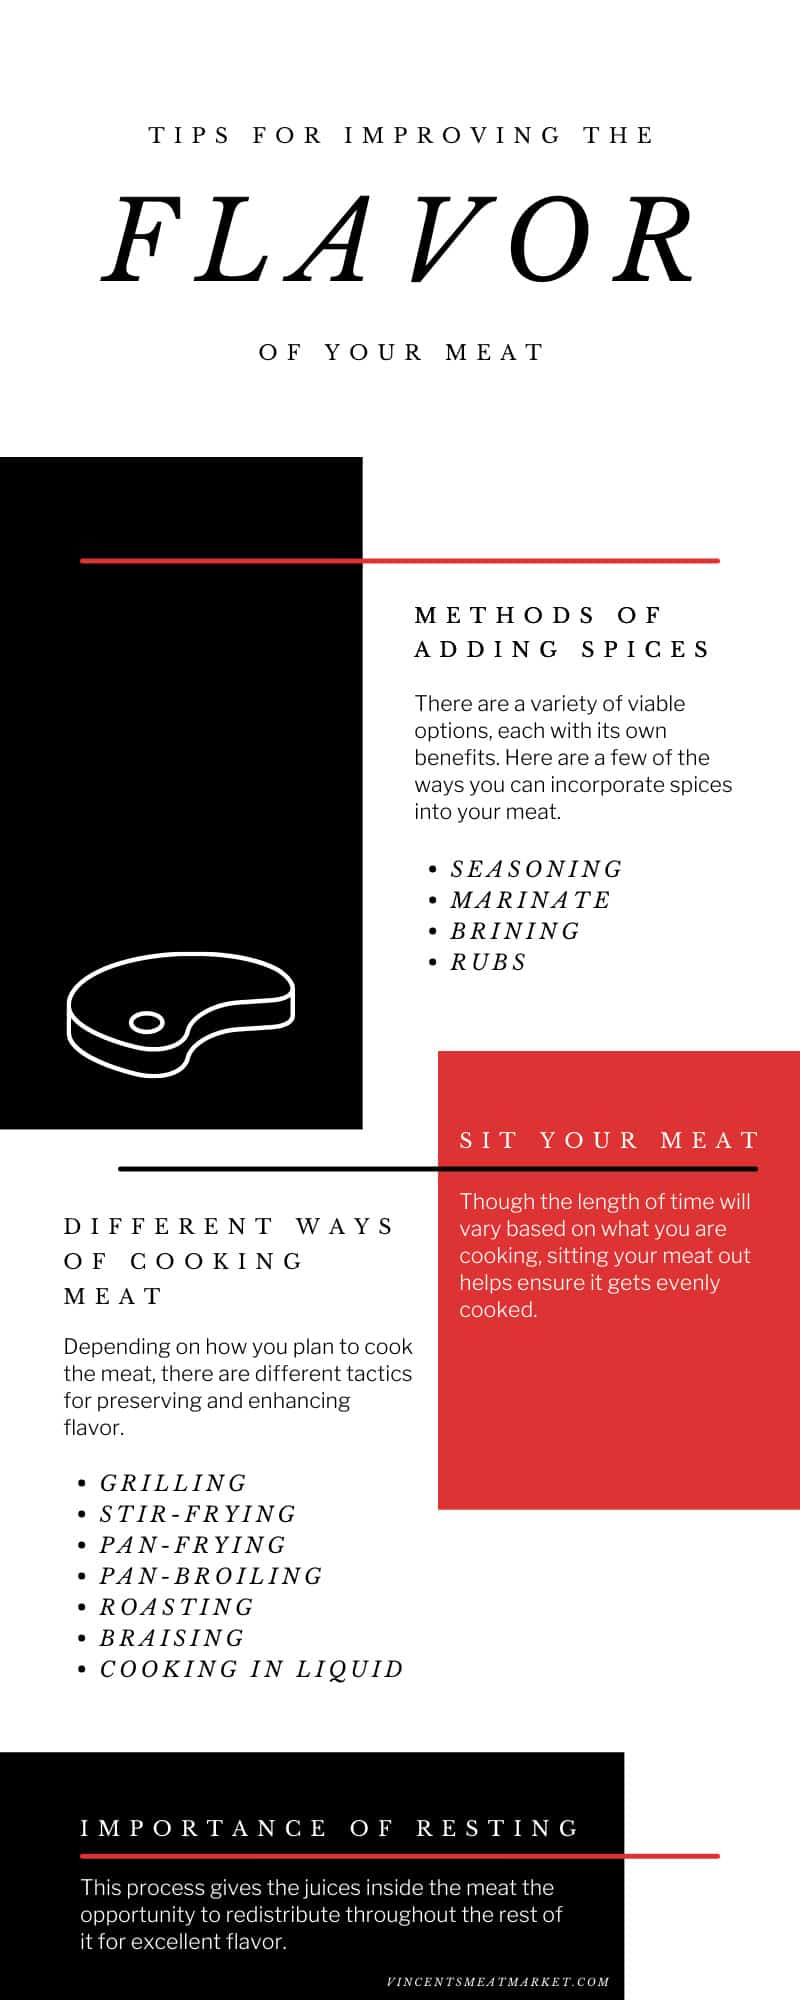 Tips for Improving the Flavor of Your Meat